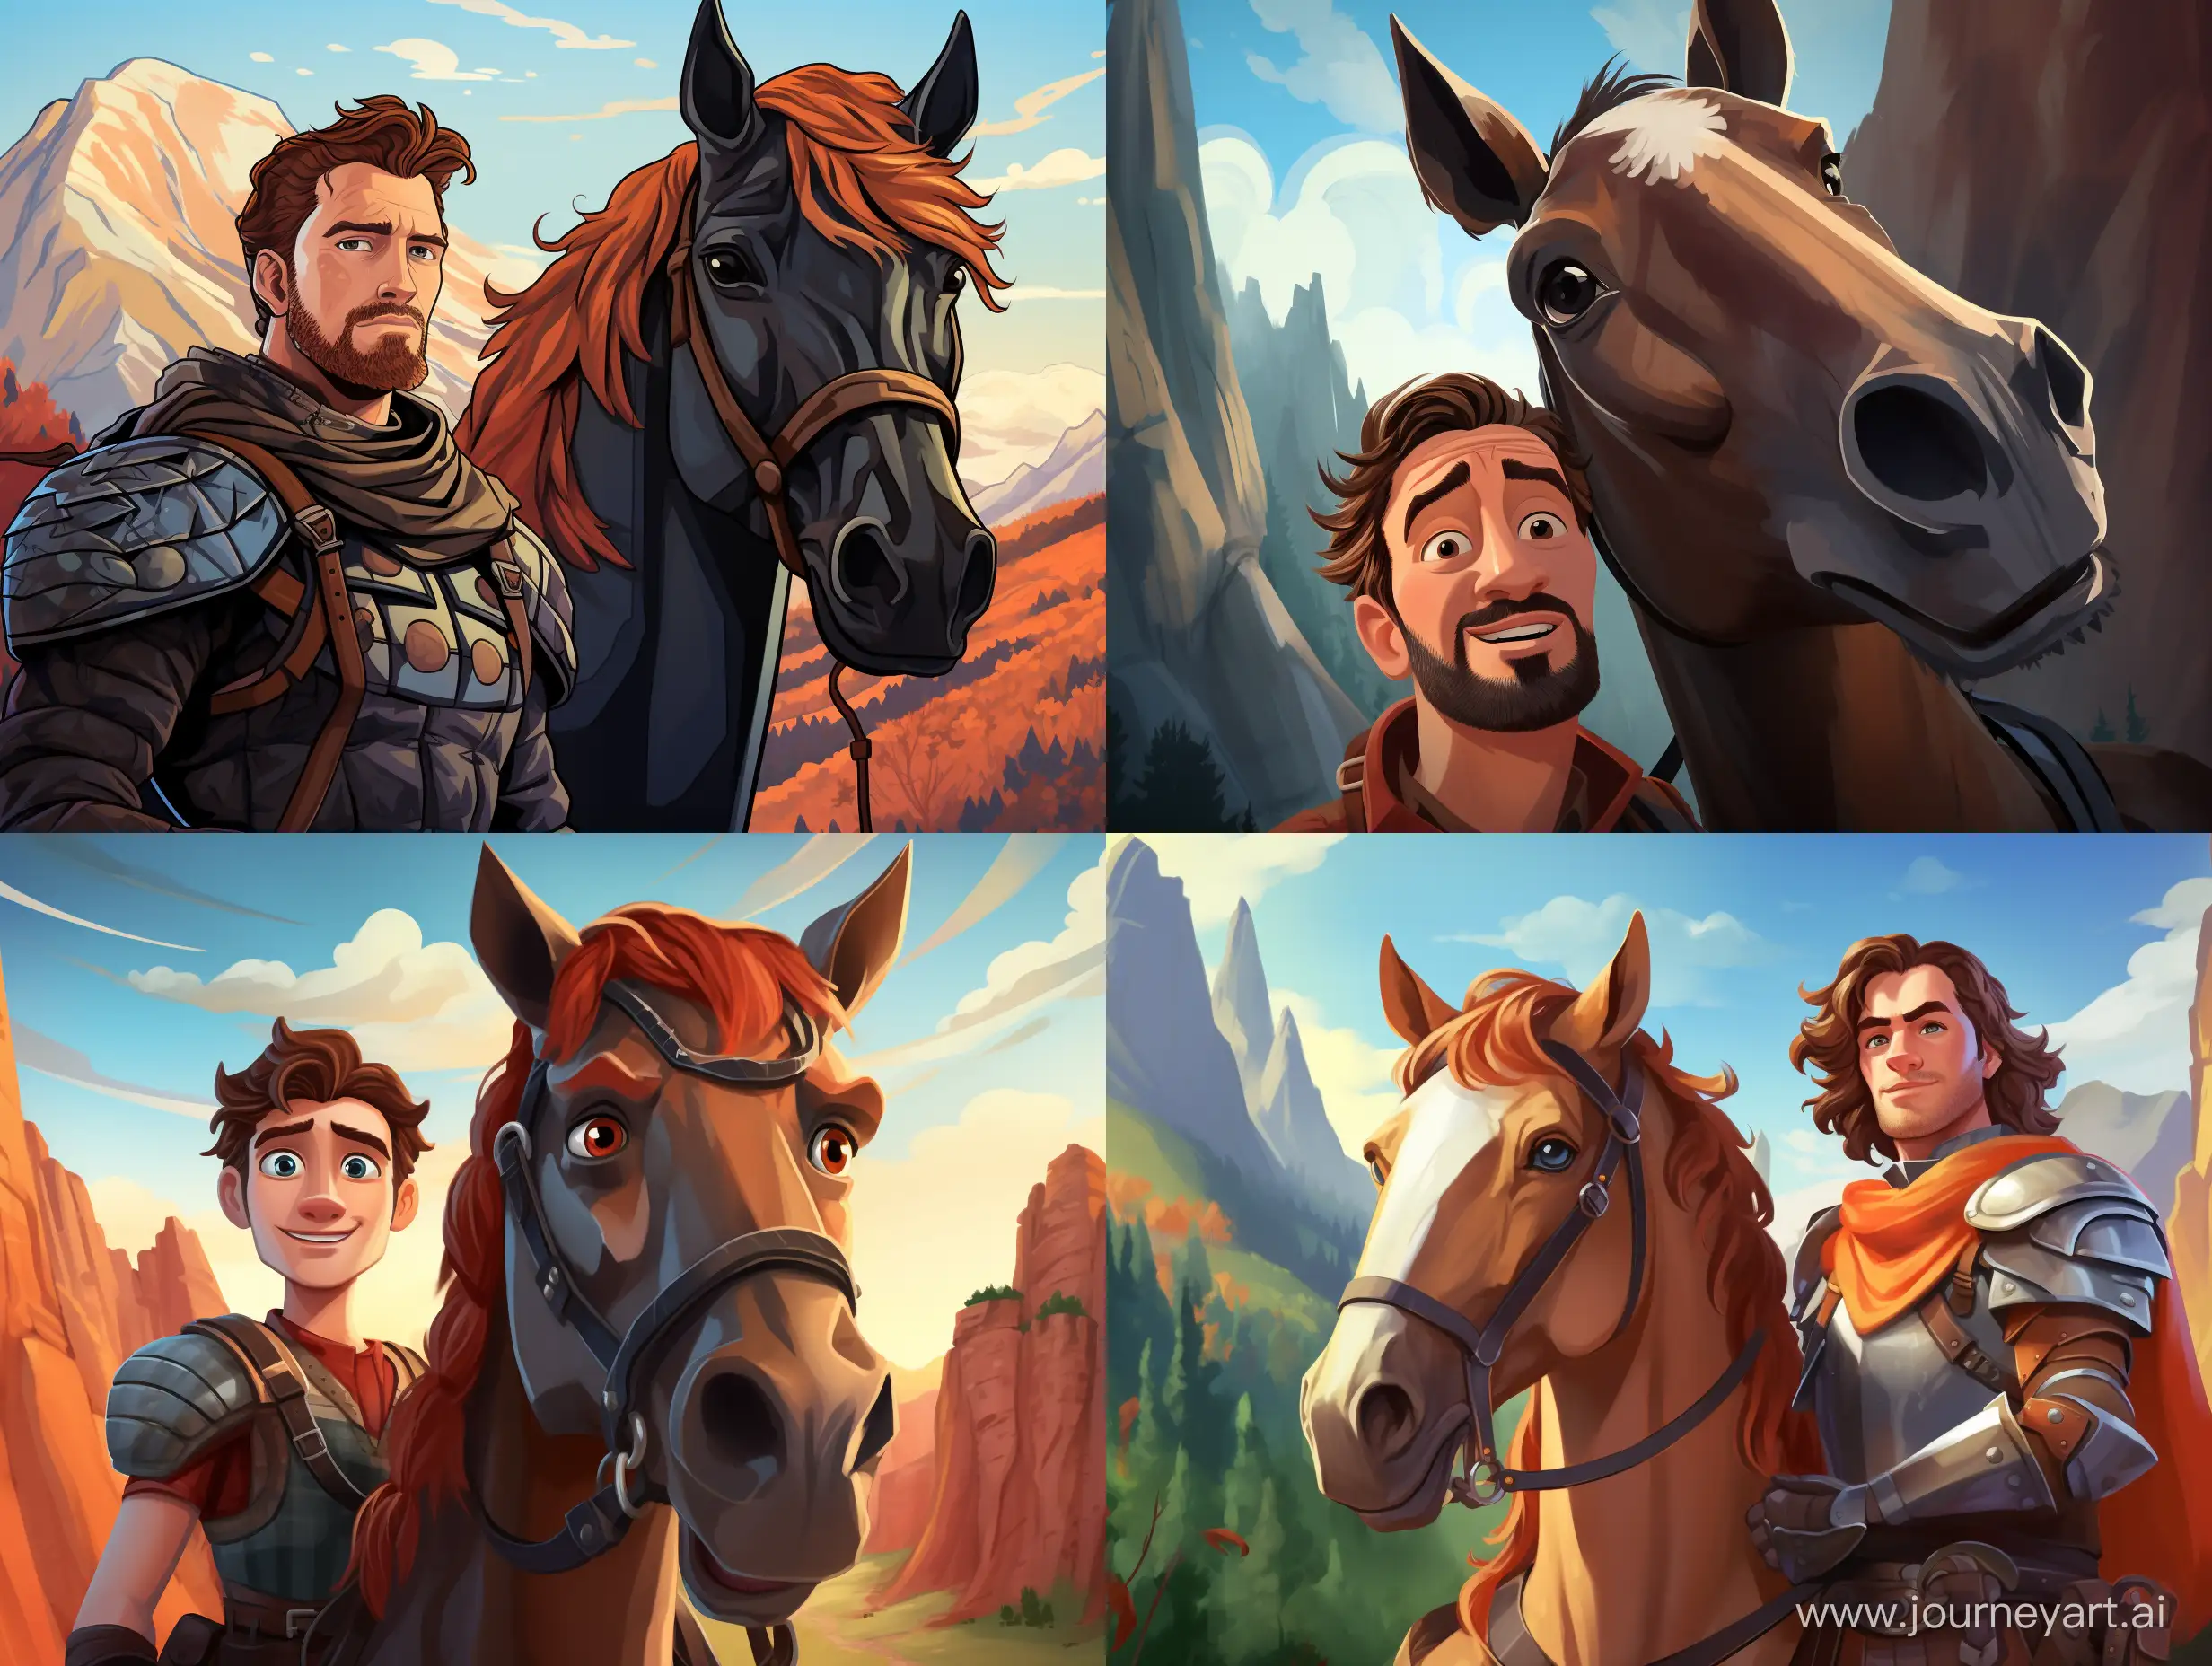 Courageous-Man-and-Steed-in-PixarStyle-Mountain-Portrait